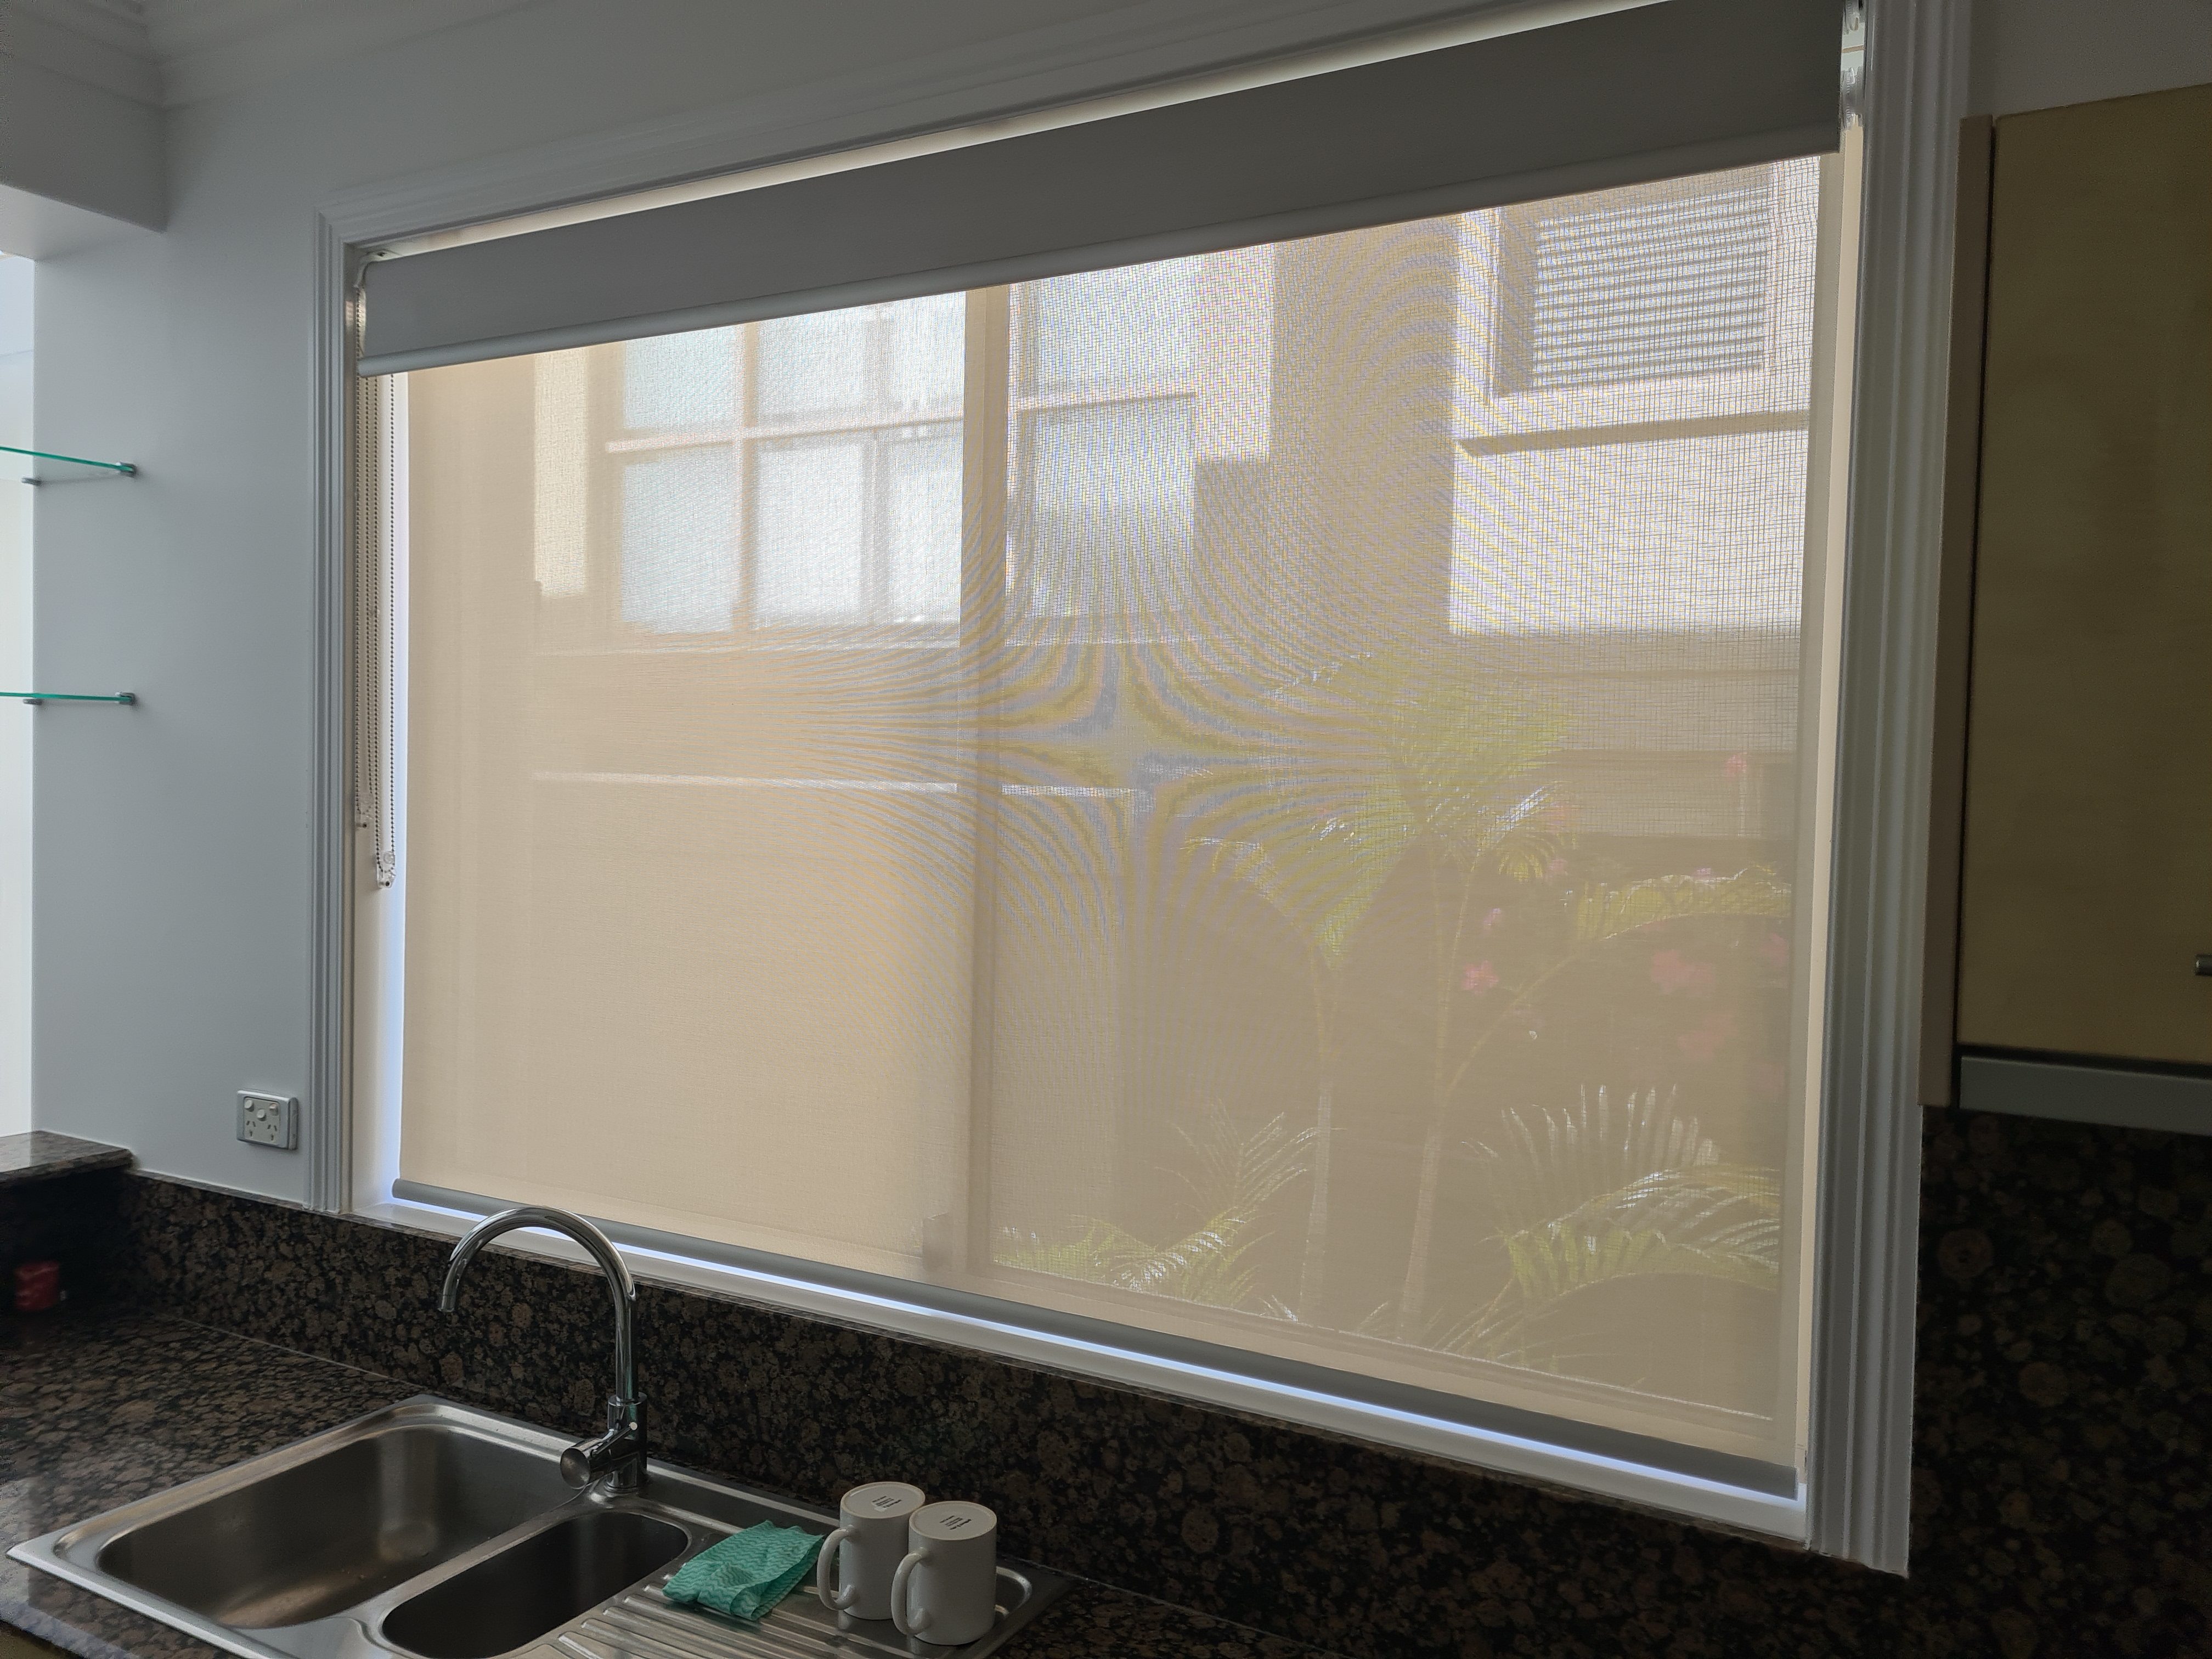 Roller Blind - Fabric: Chatsworth Blockout, Colour: Shimmer, Duo Screen, Colour: White Stone